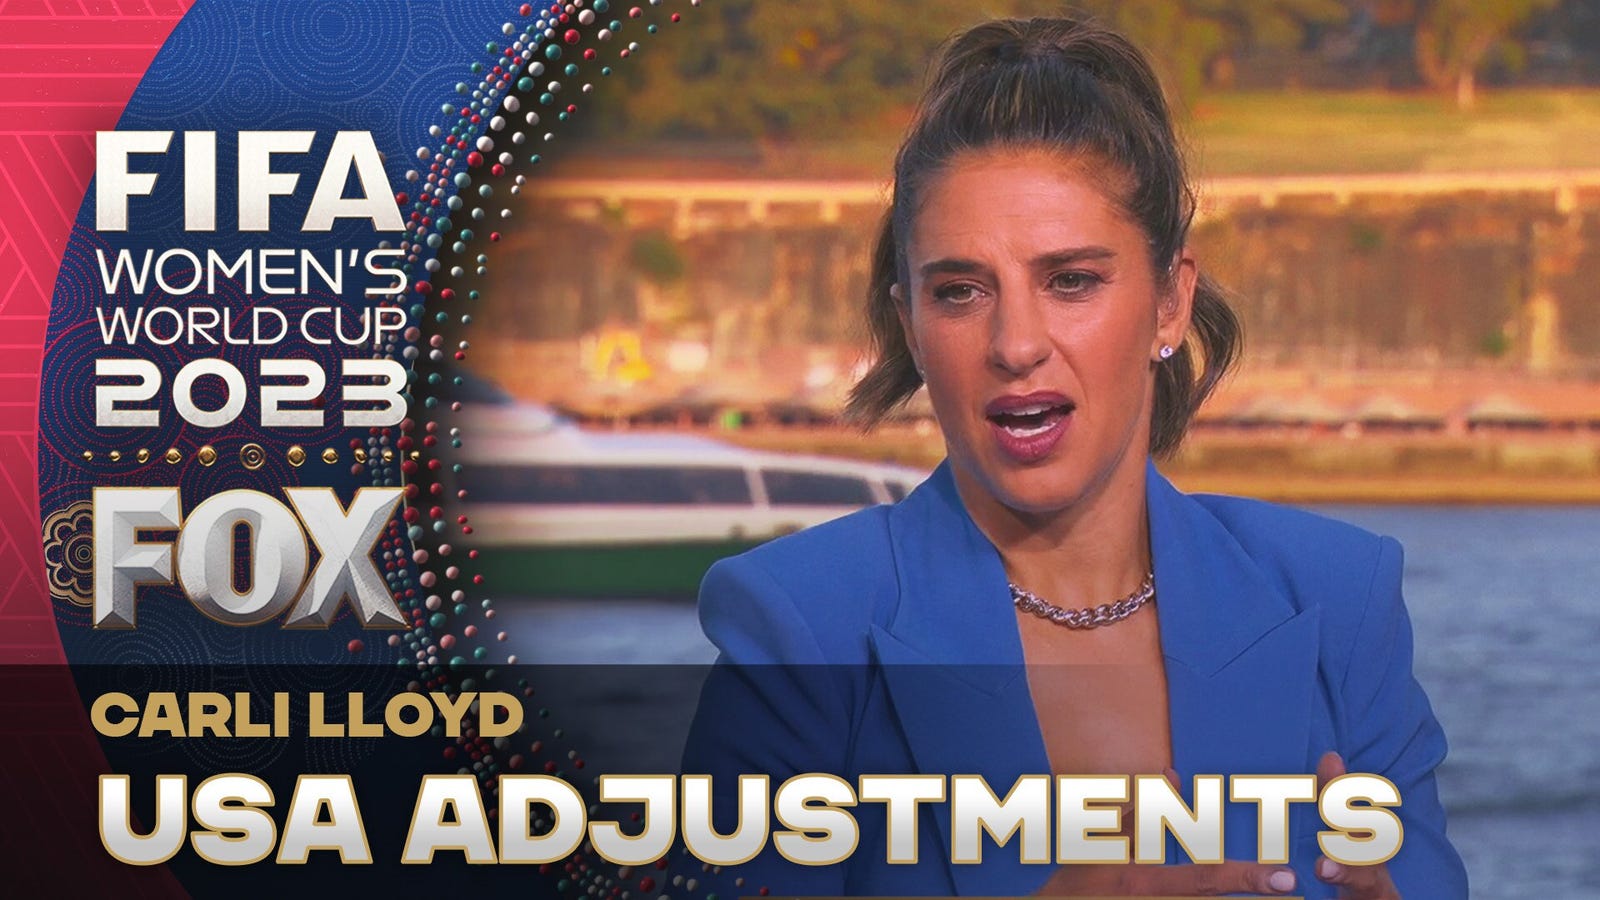 'I think this calls for a formation change' — Carli Lloyd on changes the USWNT should make in their next match vs. Sweden